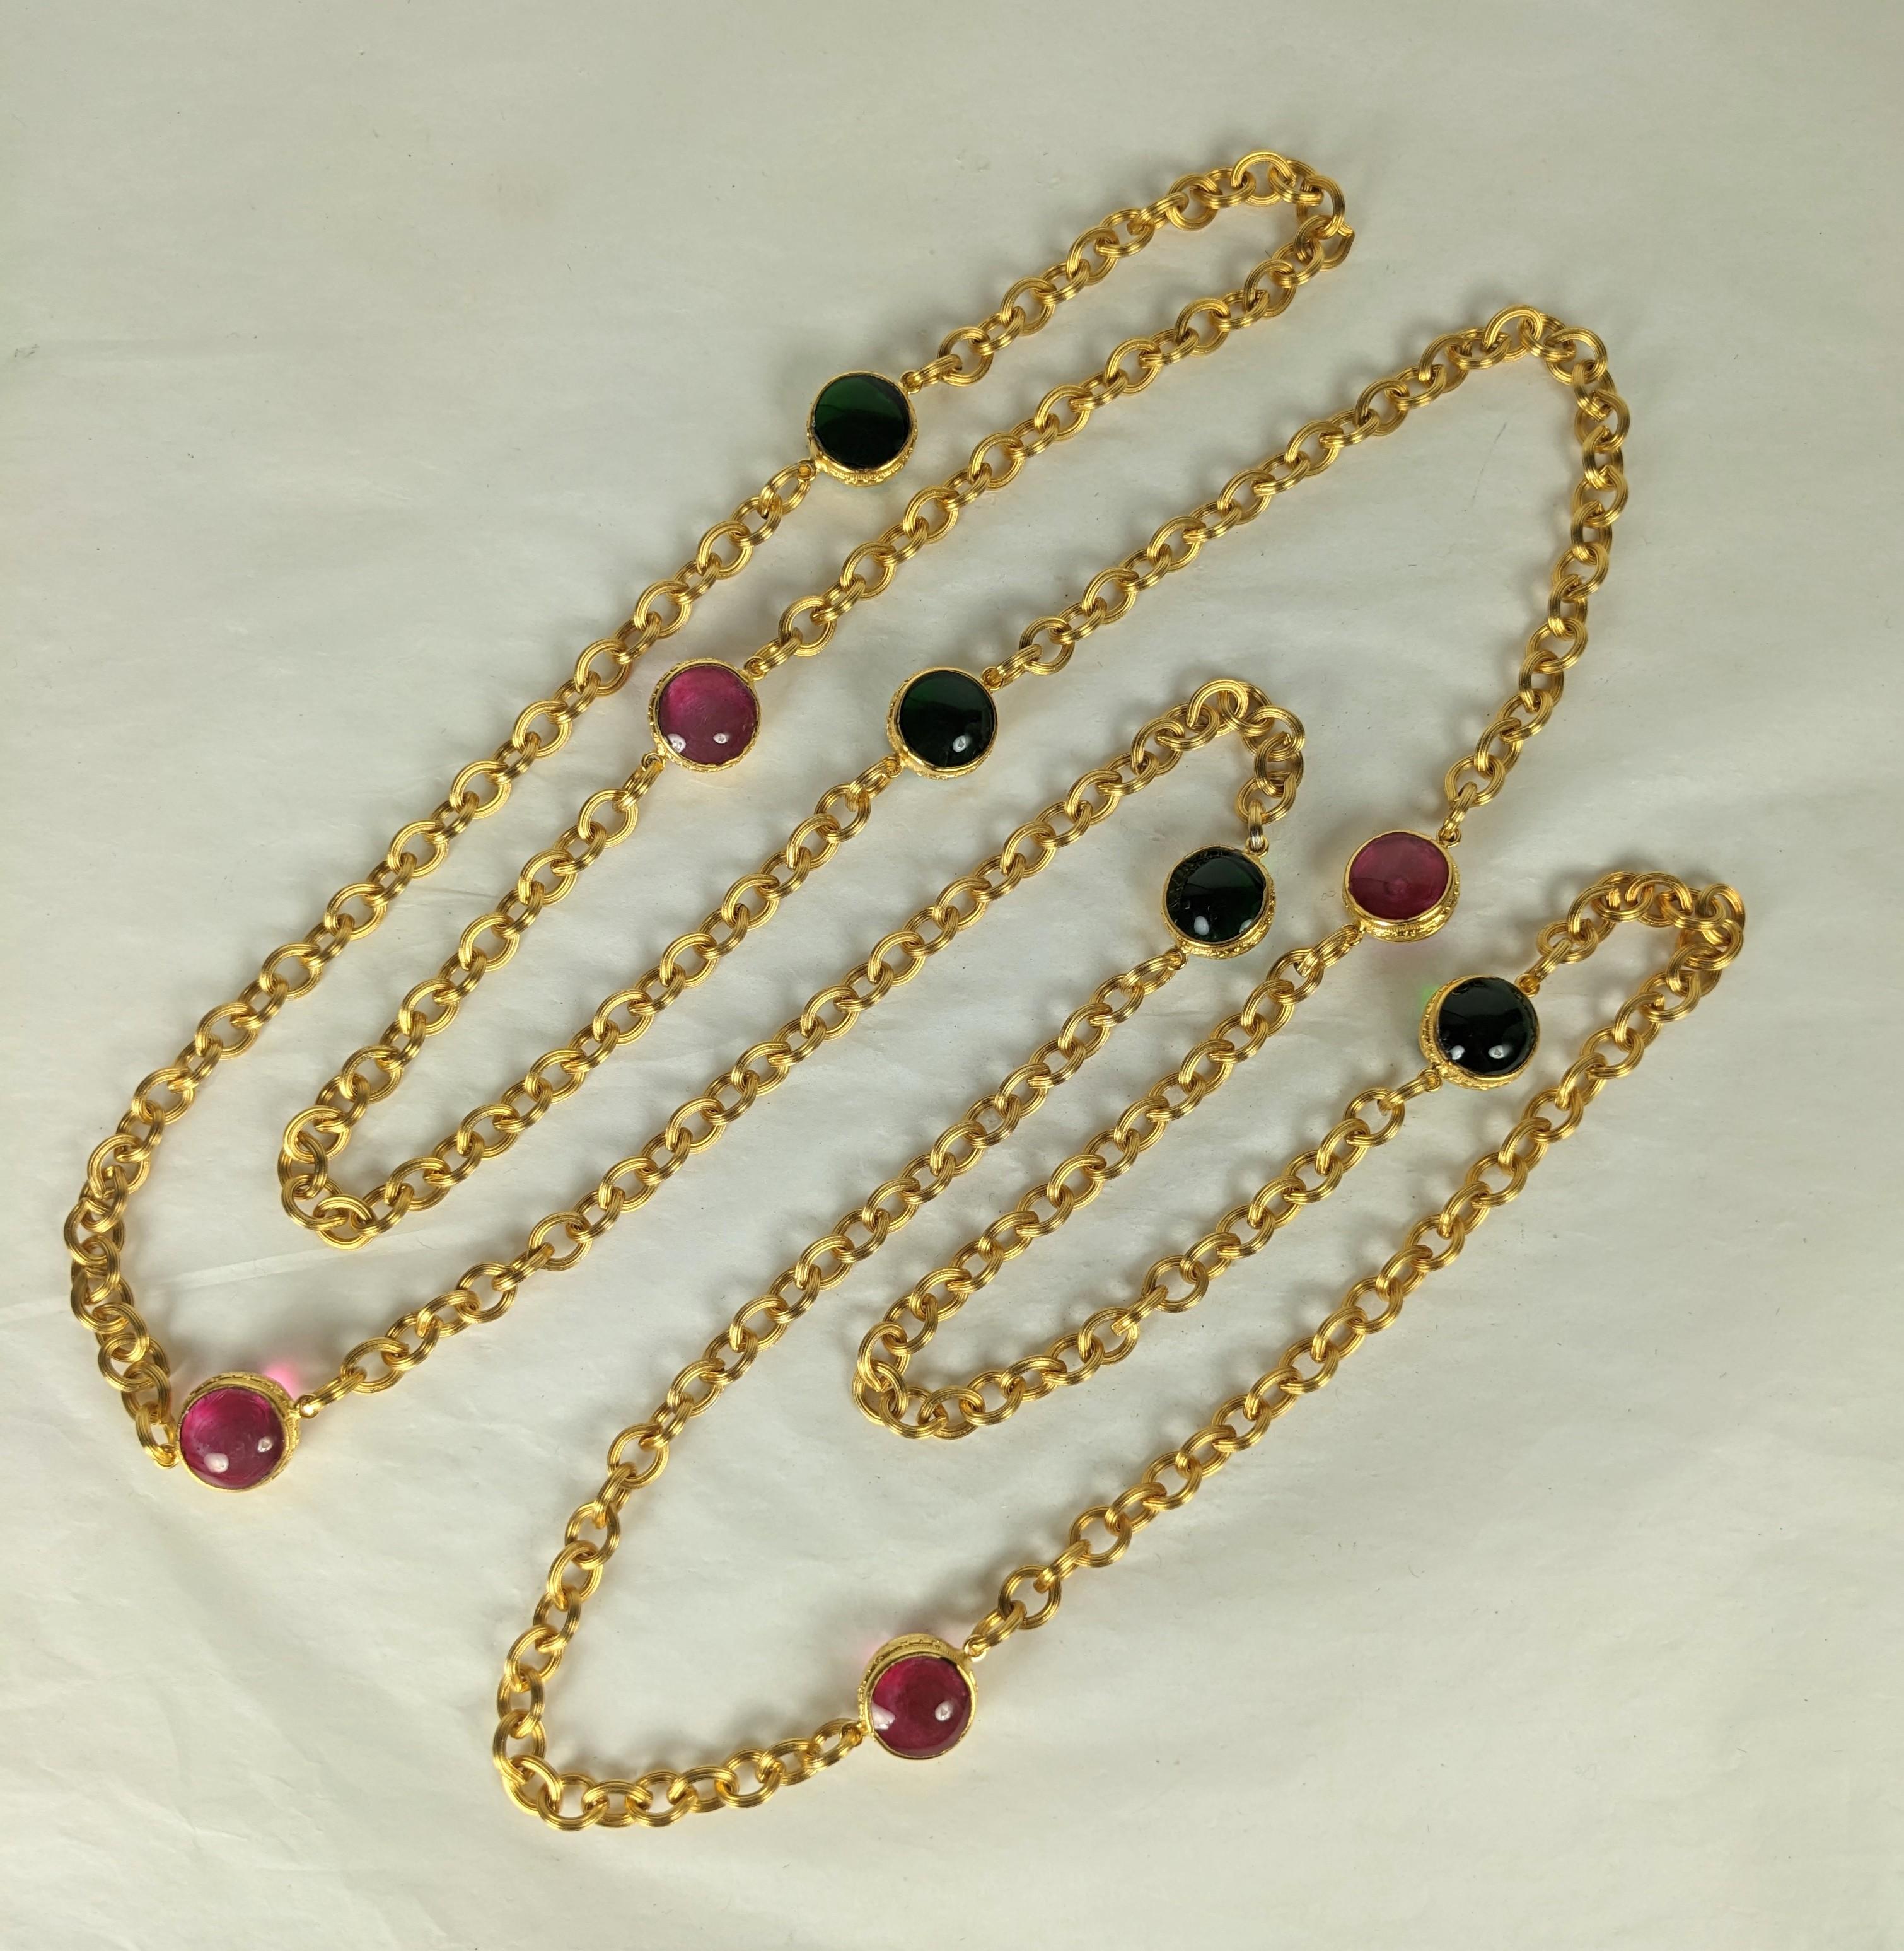 Maison Gripoix for Chanel Renaissance Chain Necklace In Excellent Condition For Sale In New York, NY